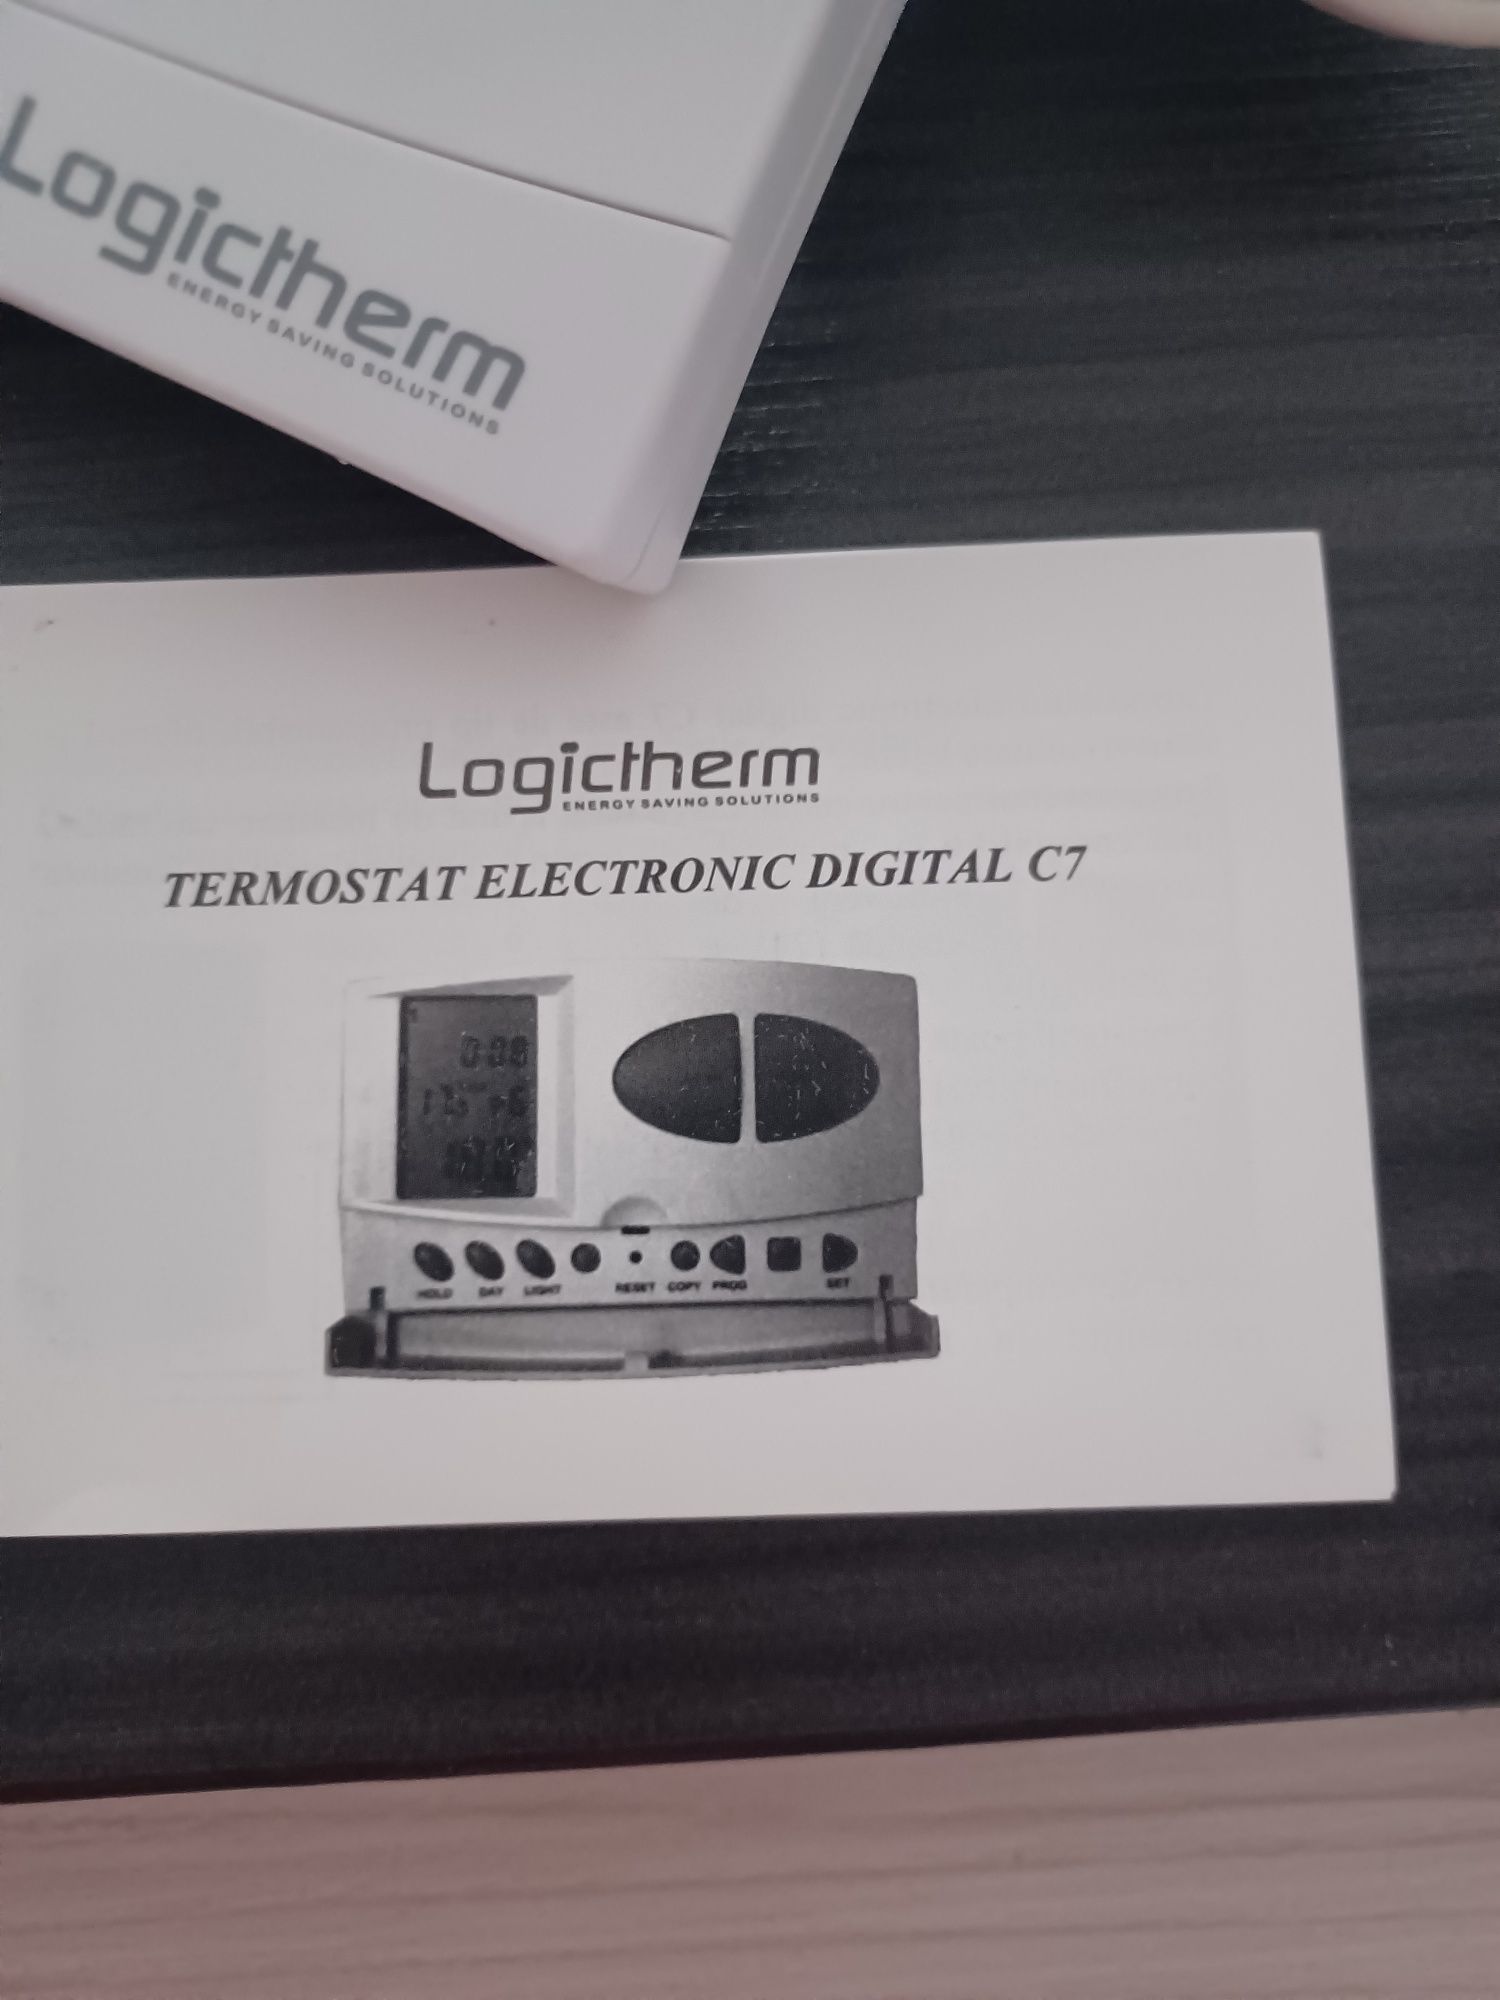 Termostat ambient logictherm